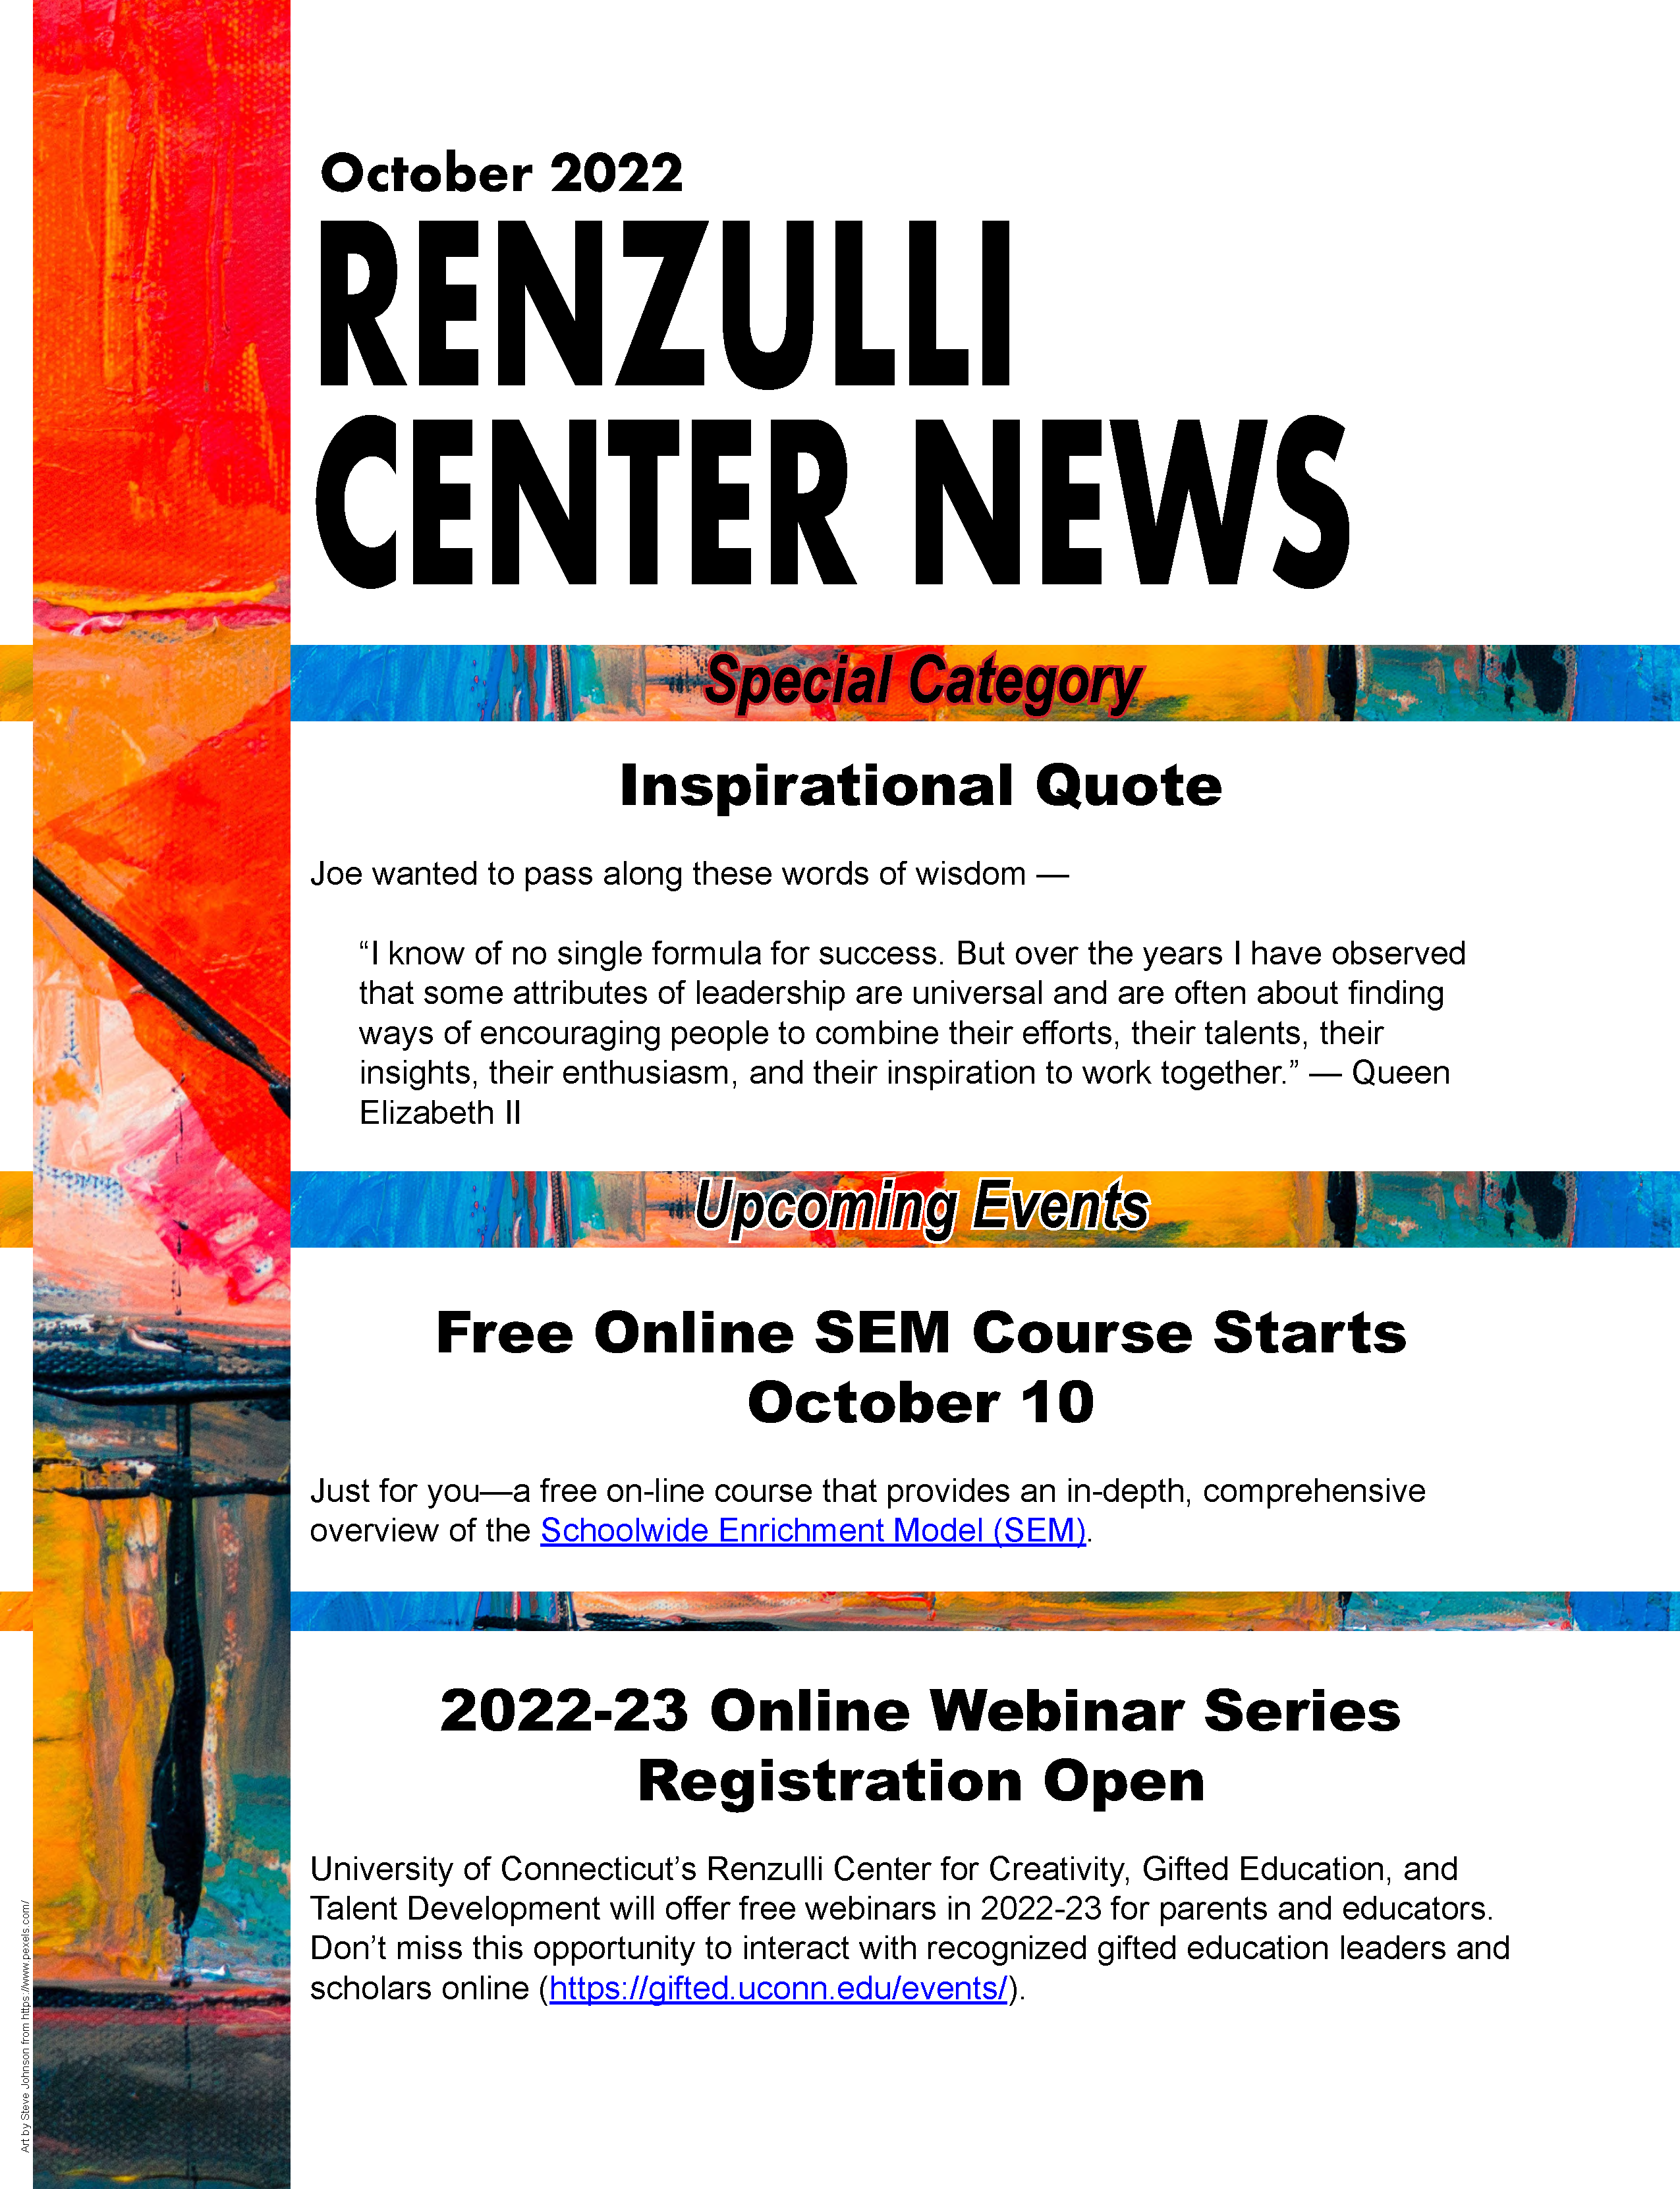 October 2022 Renzulli News Cover Graphic